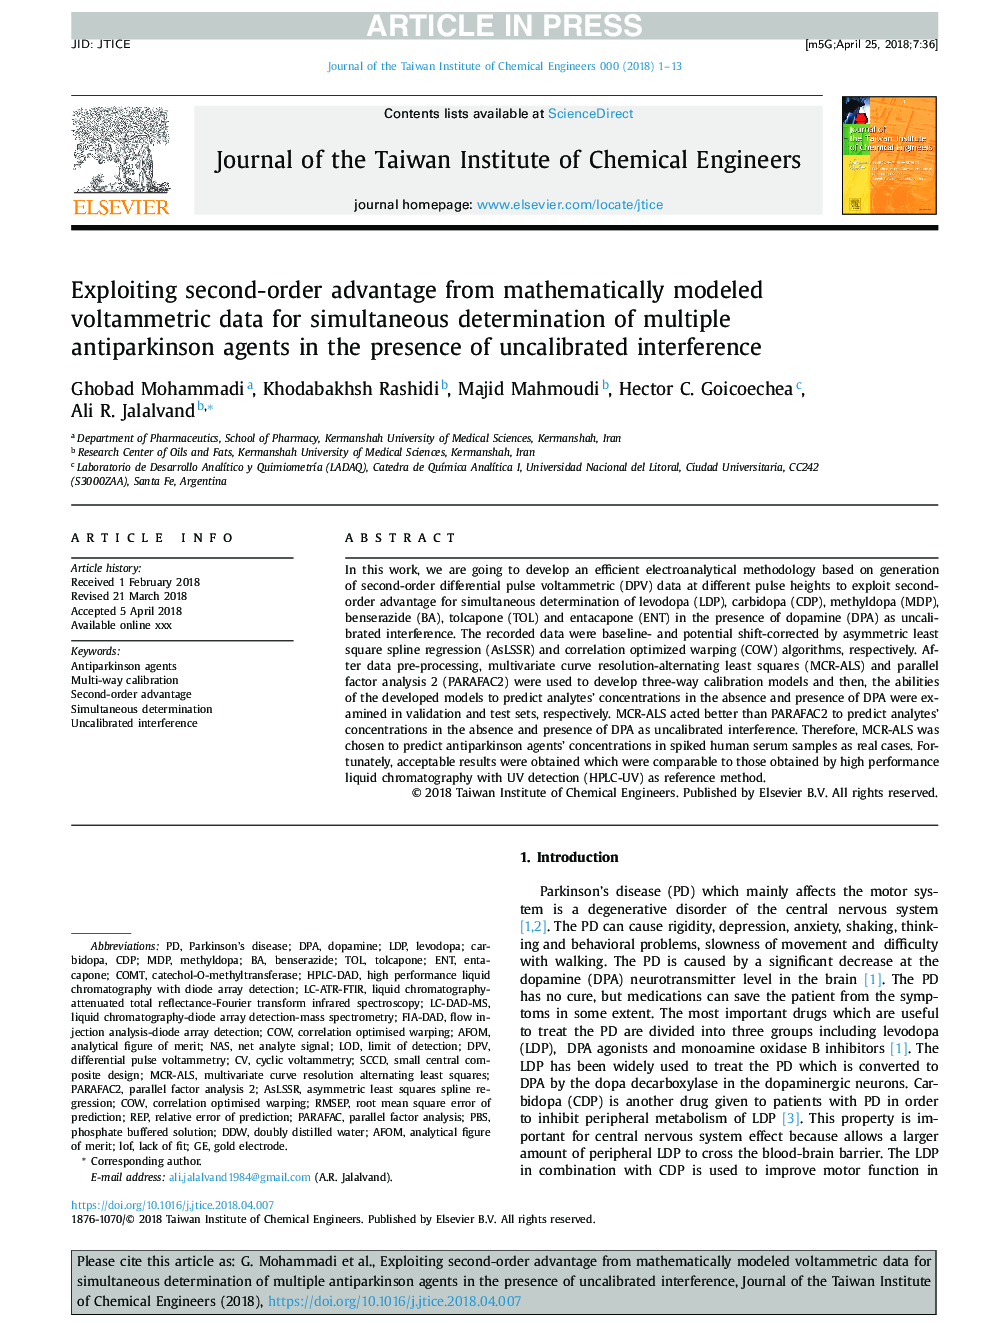 Exploiting second-order advantage from mathematically modeled voltammetric data for simultaneous determination of multiple antiparkinson agents in the presence of uncalibrated interference